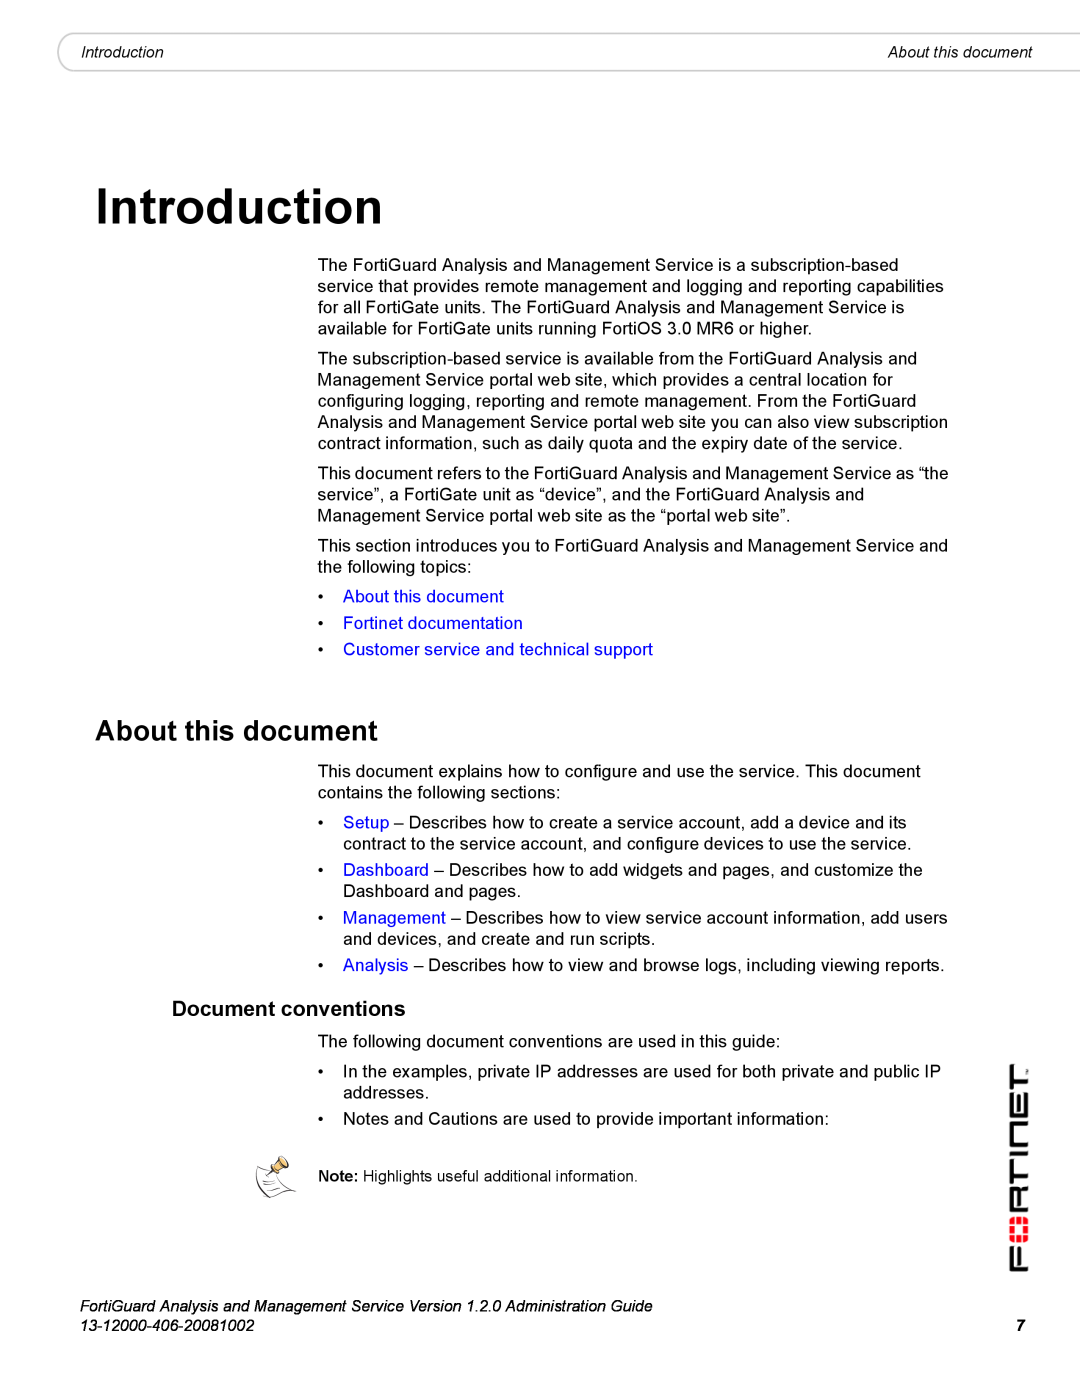 Fortinet 1.2.0 manual Introduction, Document conventions, About this document Fortinet documentation 